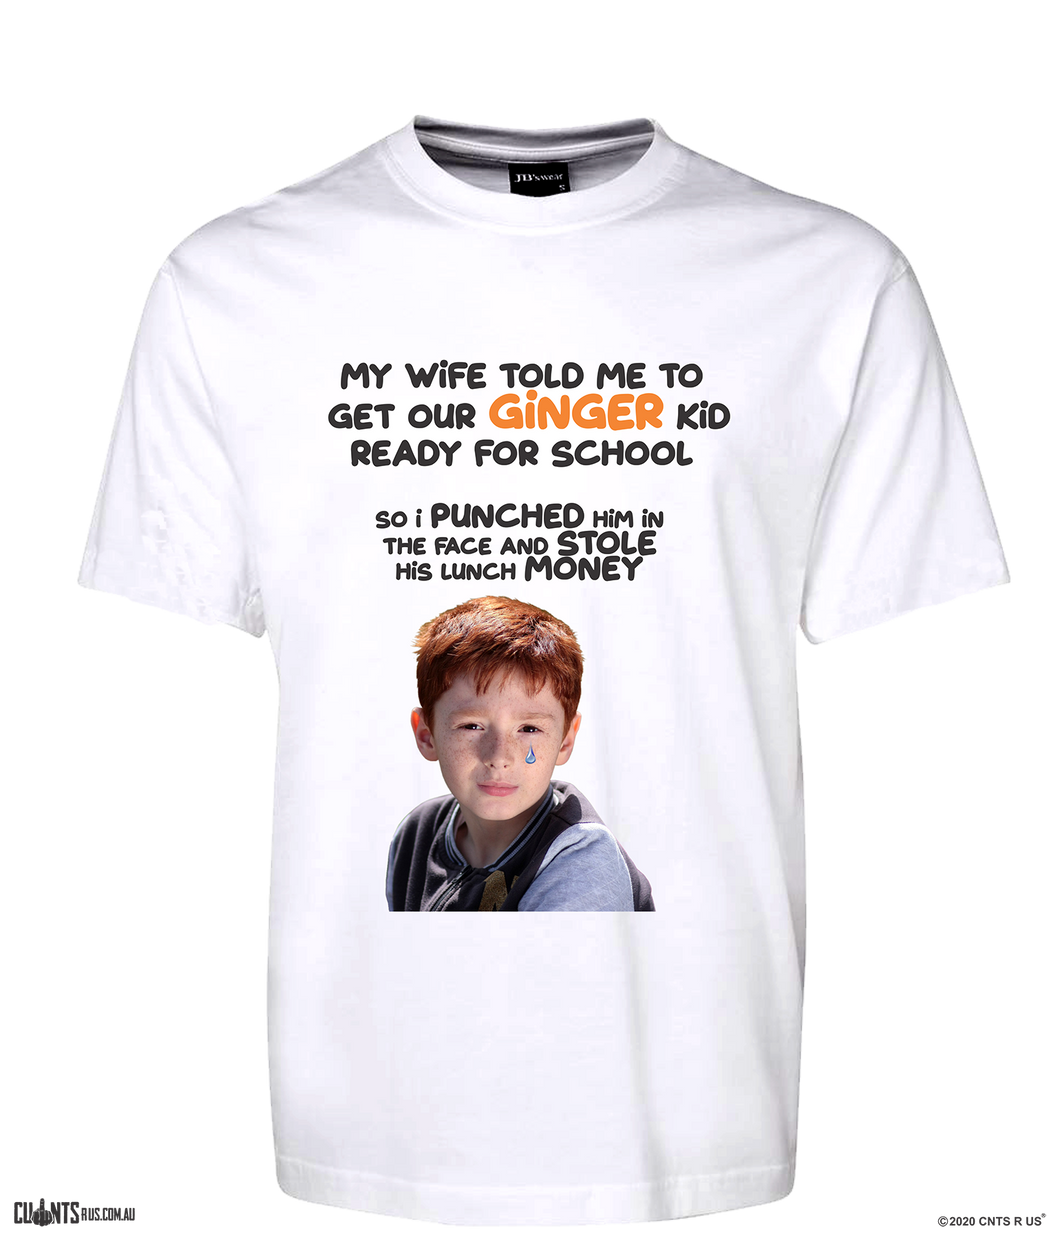 My Wife Told Me To Get Our Ginger Kid Ready For School... T-Shirt CRU01-1HT-12170